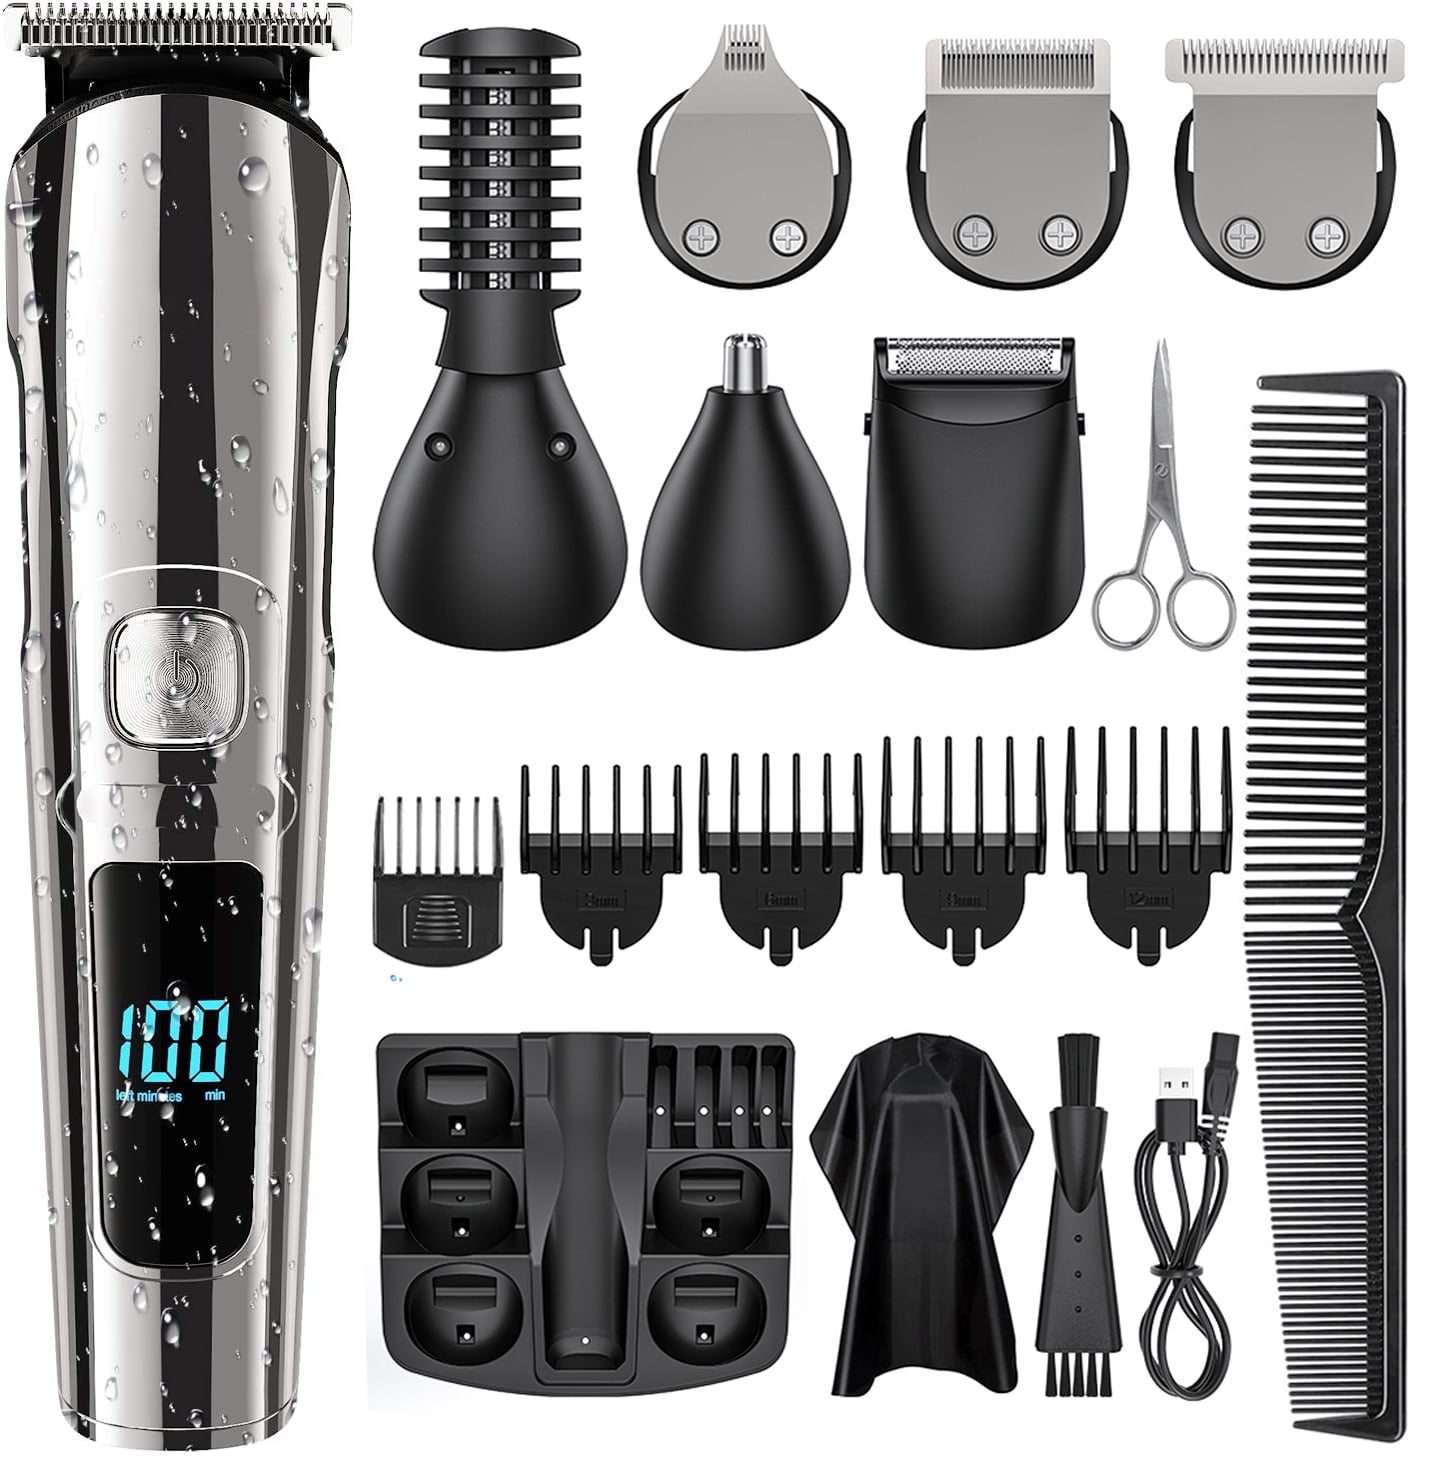 Hair Clipper for Men, 16 in 1 Grooming Kit IPX7 Waterproof, Cordless  Electric Beard Trimmer, Body Mustache Nose Ear Facial Cutting Groomer for  Wet/Dry W/ USB Rechargeable & LED Display & Storage